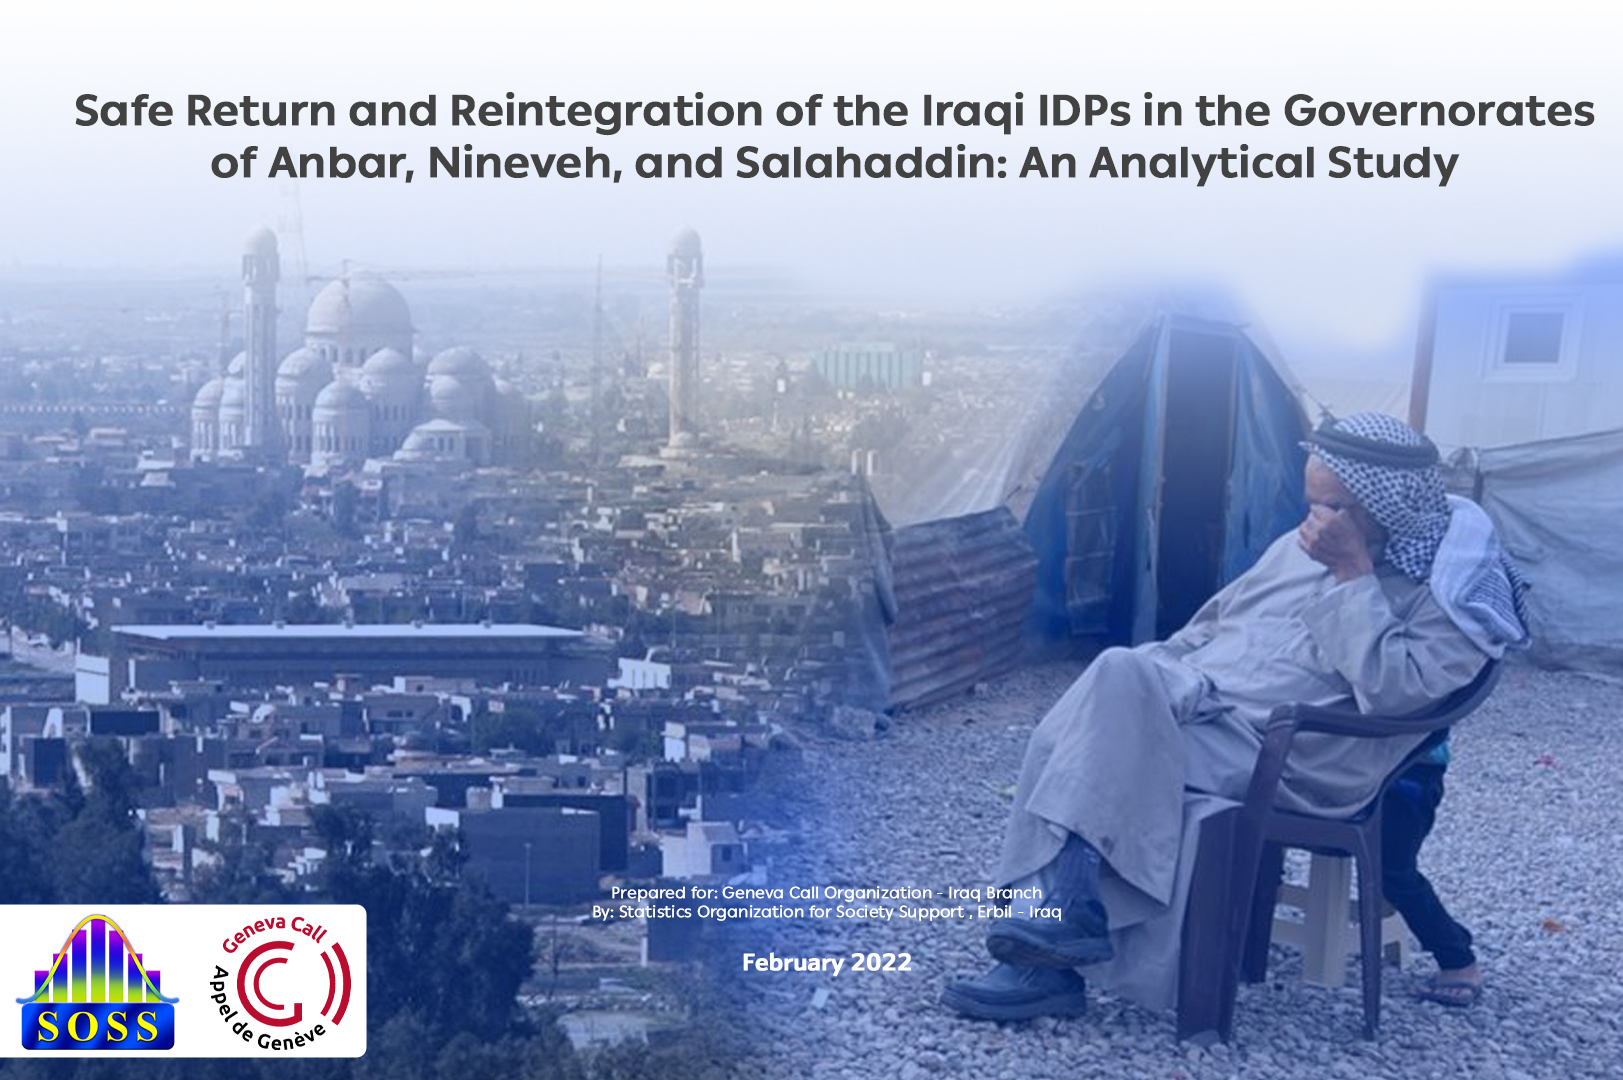 Safe Return and Reintegration of IDPs in the Iraqi Governorates of Anbar, Nineveh, and Salahaddin: An Analytical Study